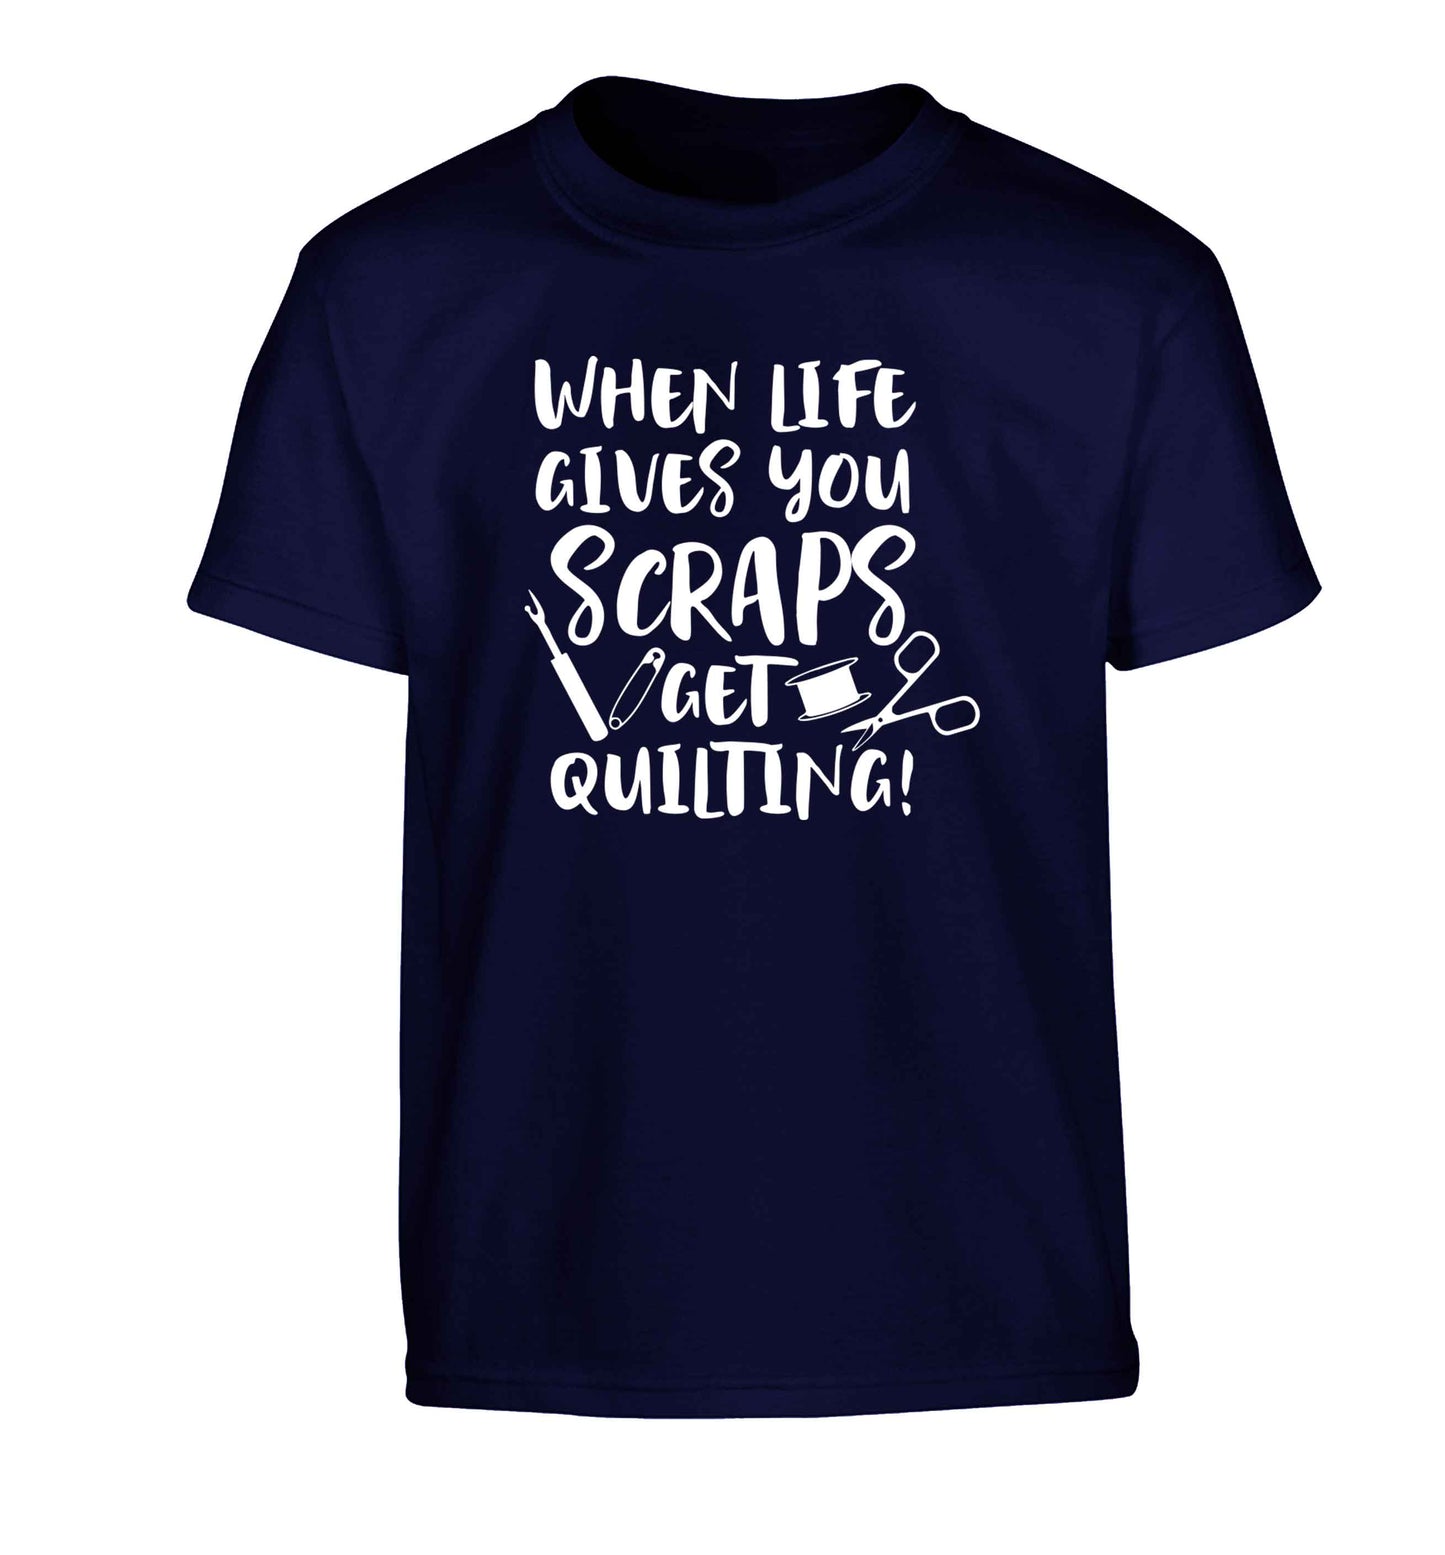 When life gives you scraps get quilting! Children's navy Tshirt 12-13 Years